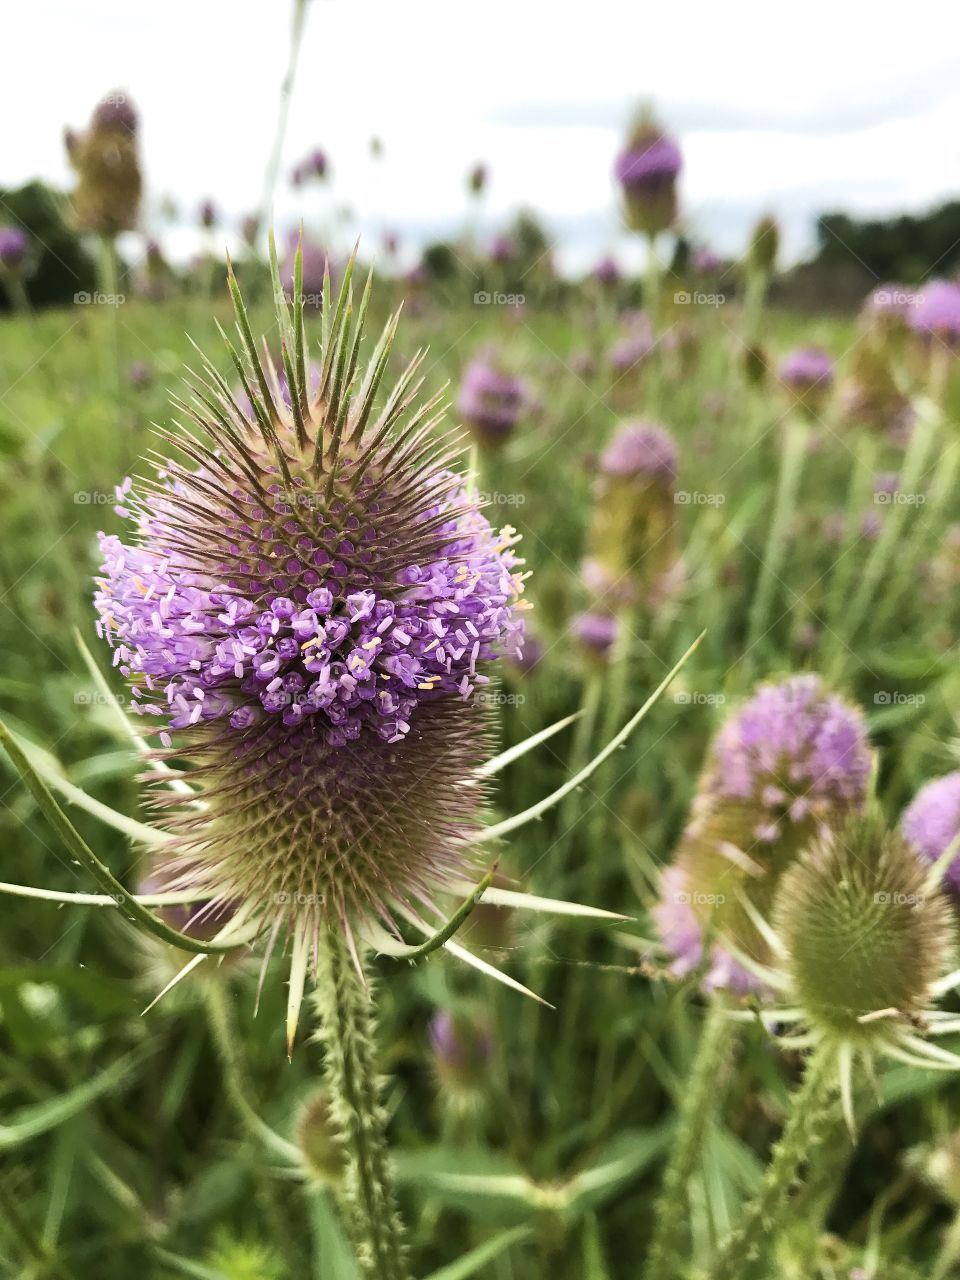 A prickly field of blooming thistles